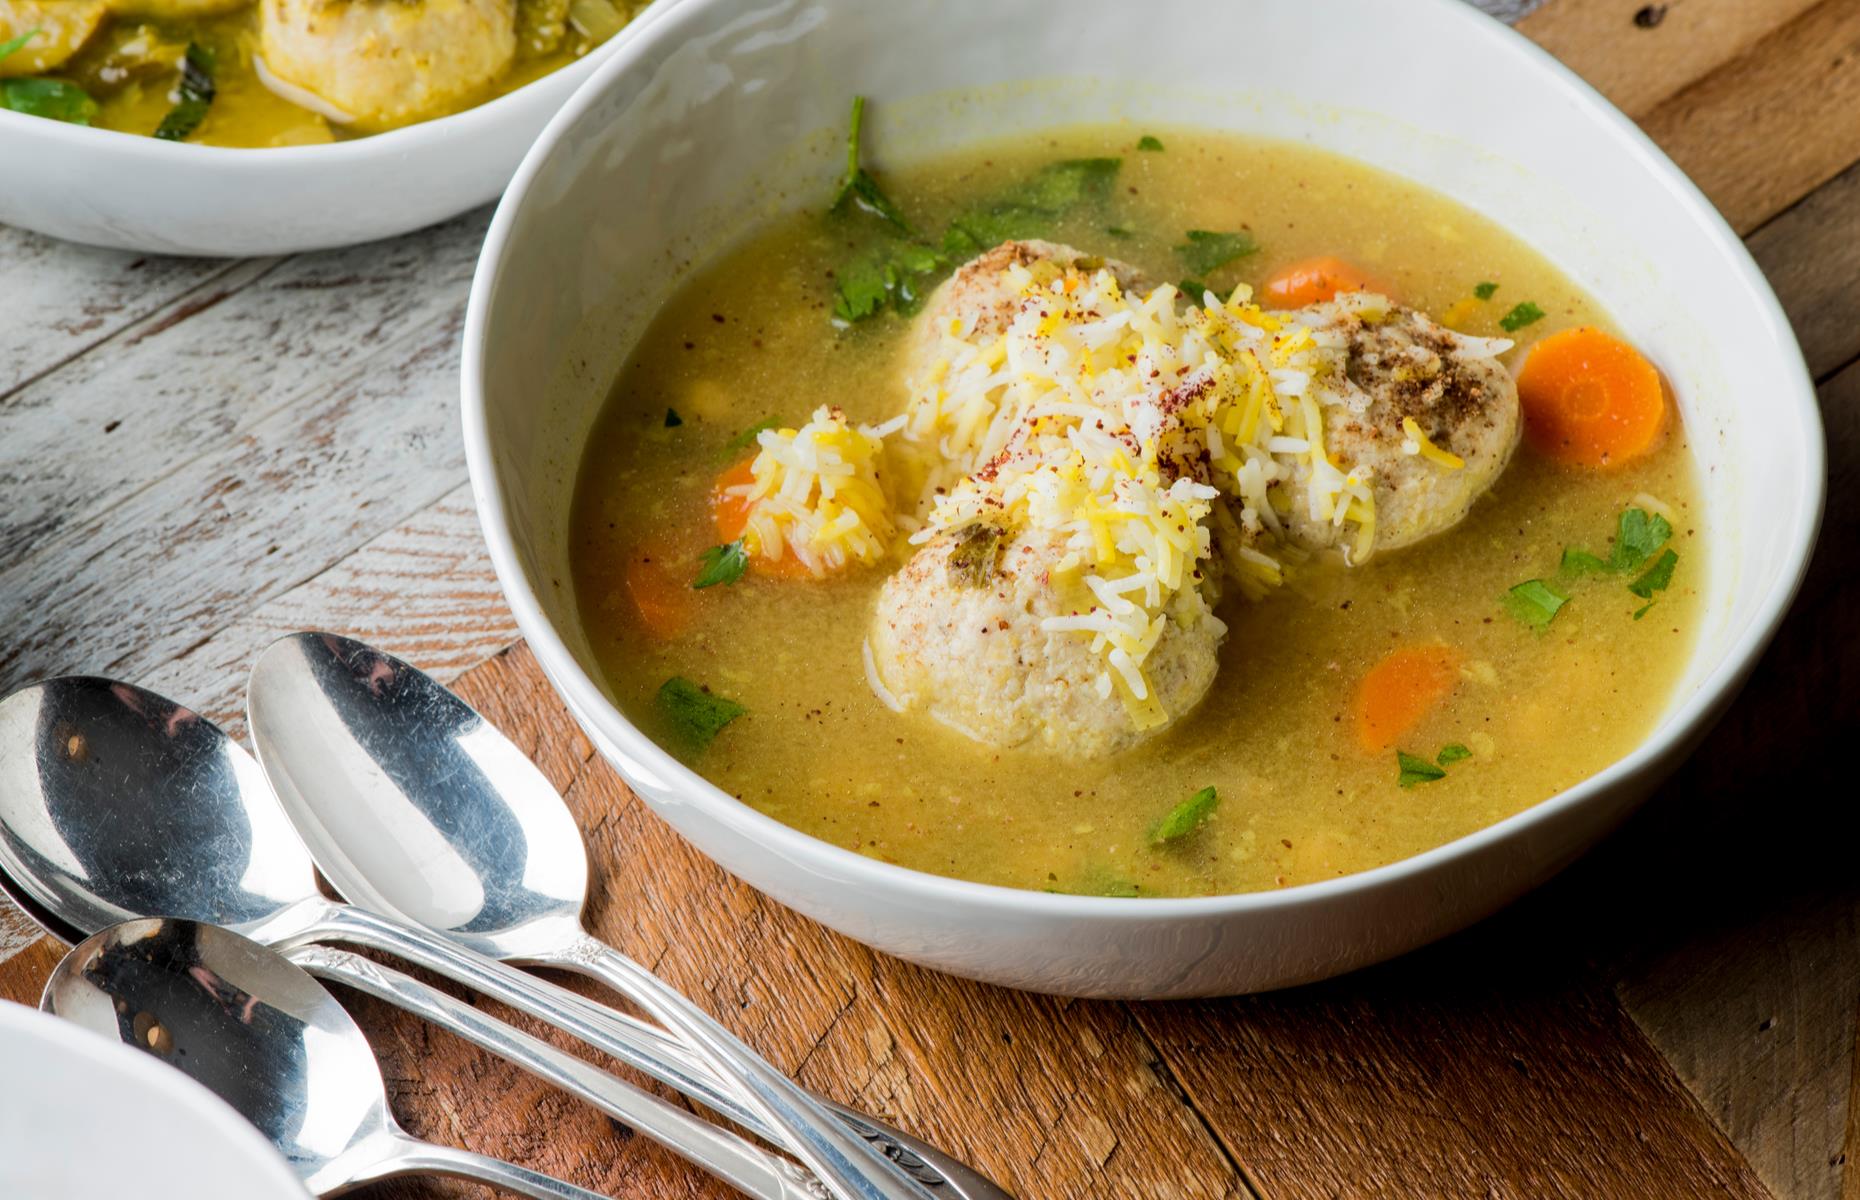 <p>When Nigella makes her 'special chicken soup' for Passover, she says using chicken wings is one of the best, and least expensive, ways to do so, since they deliver an abundance of flavor. She also freezes extra matzo balls for a quick midweek supper to eat with rice, toasted pine nuts and fresh parsley. </p>